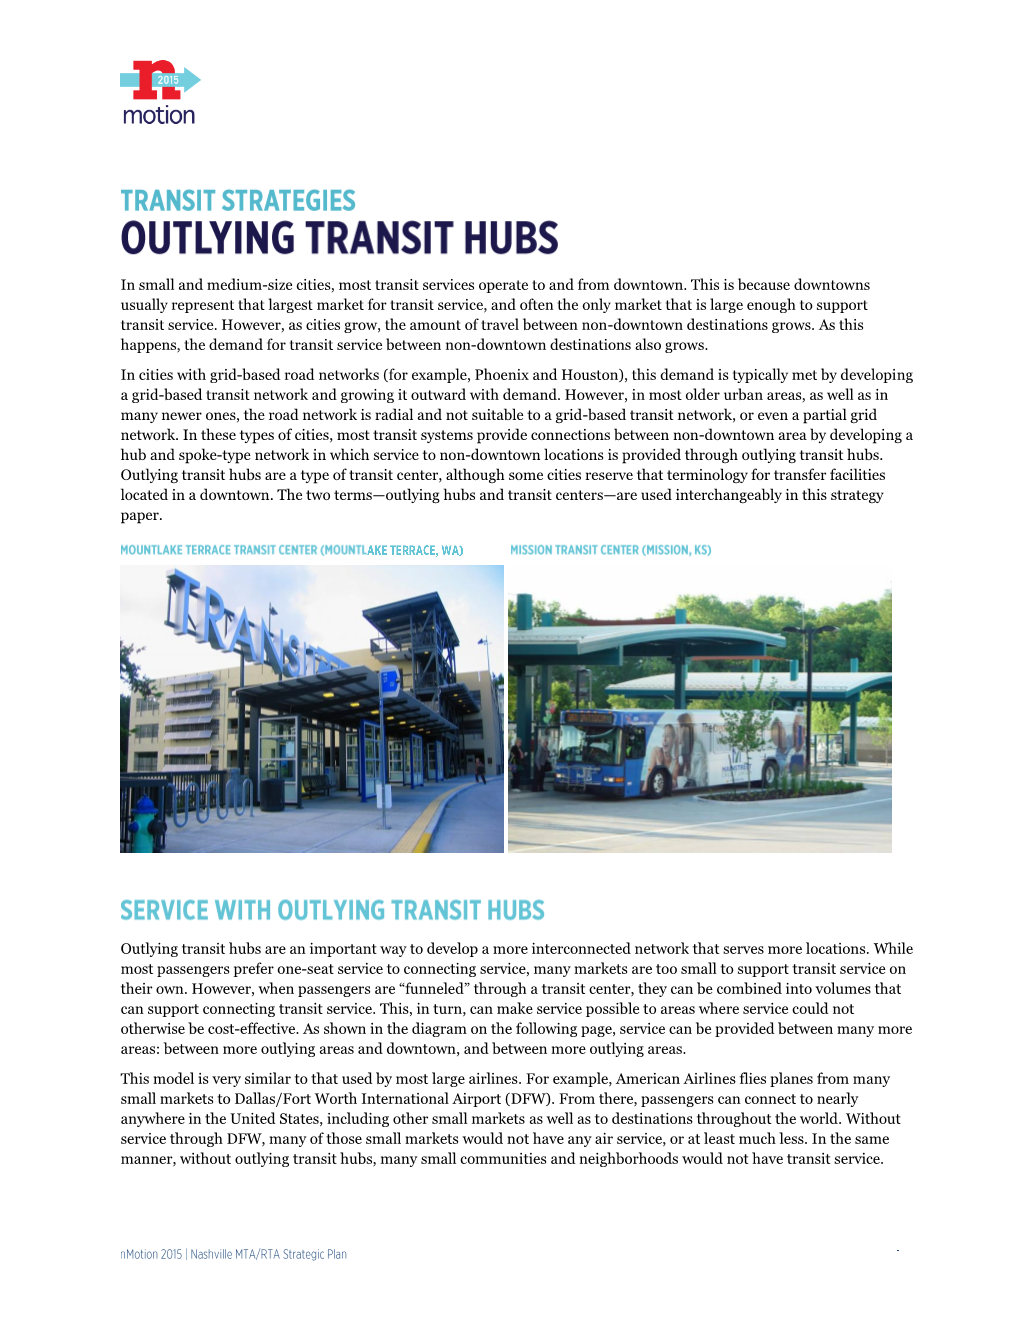 Outlying Hubs and Transit Centers—Are Used Interchangeably in This Strategy Paper